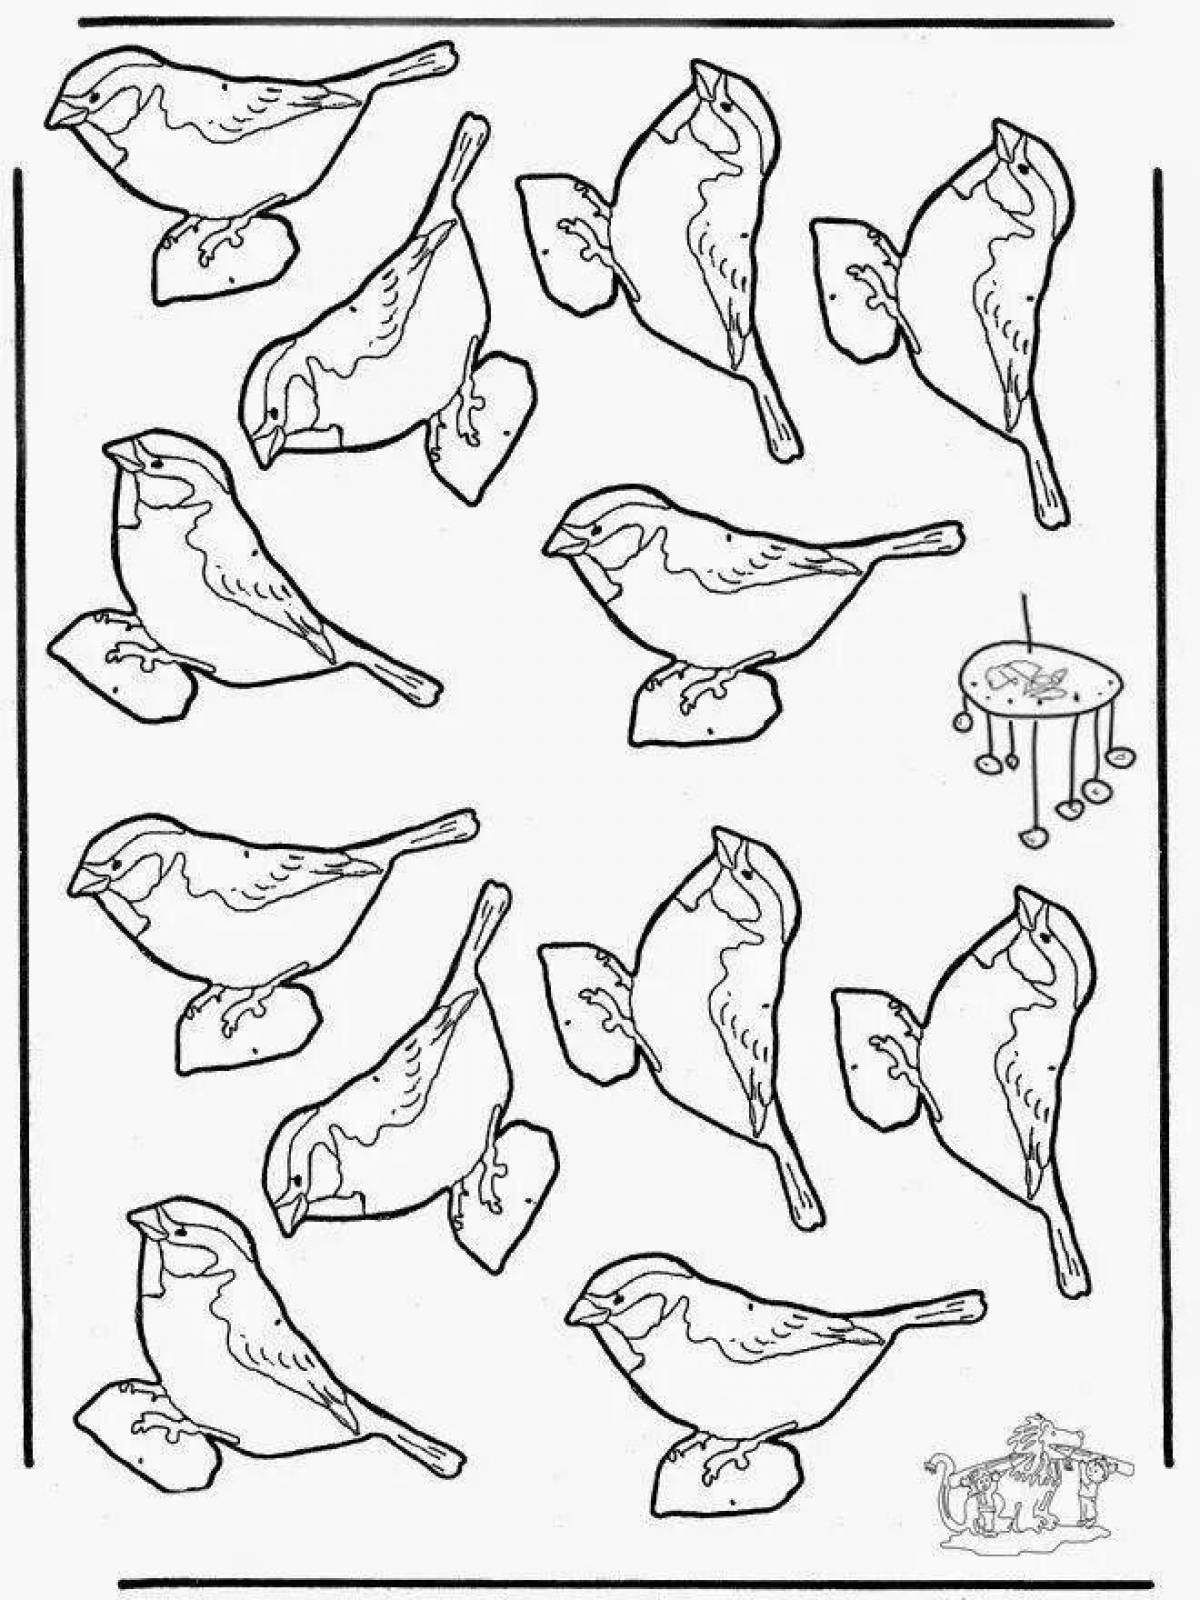 Coloring page playful wintering birds